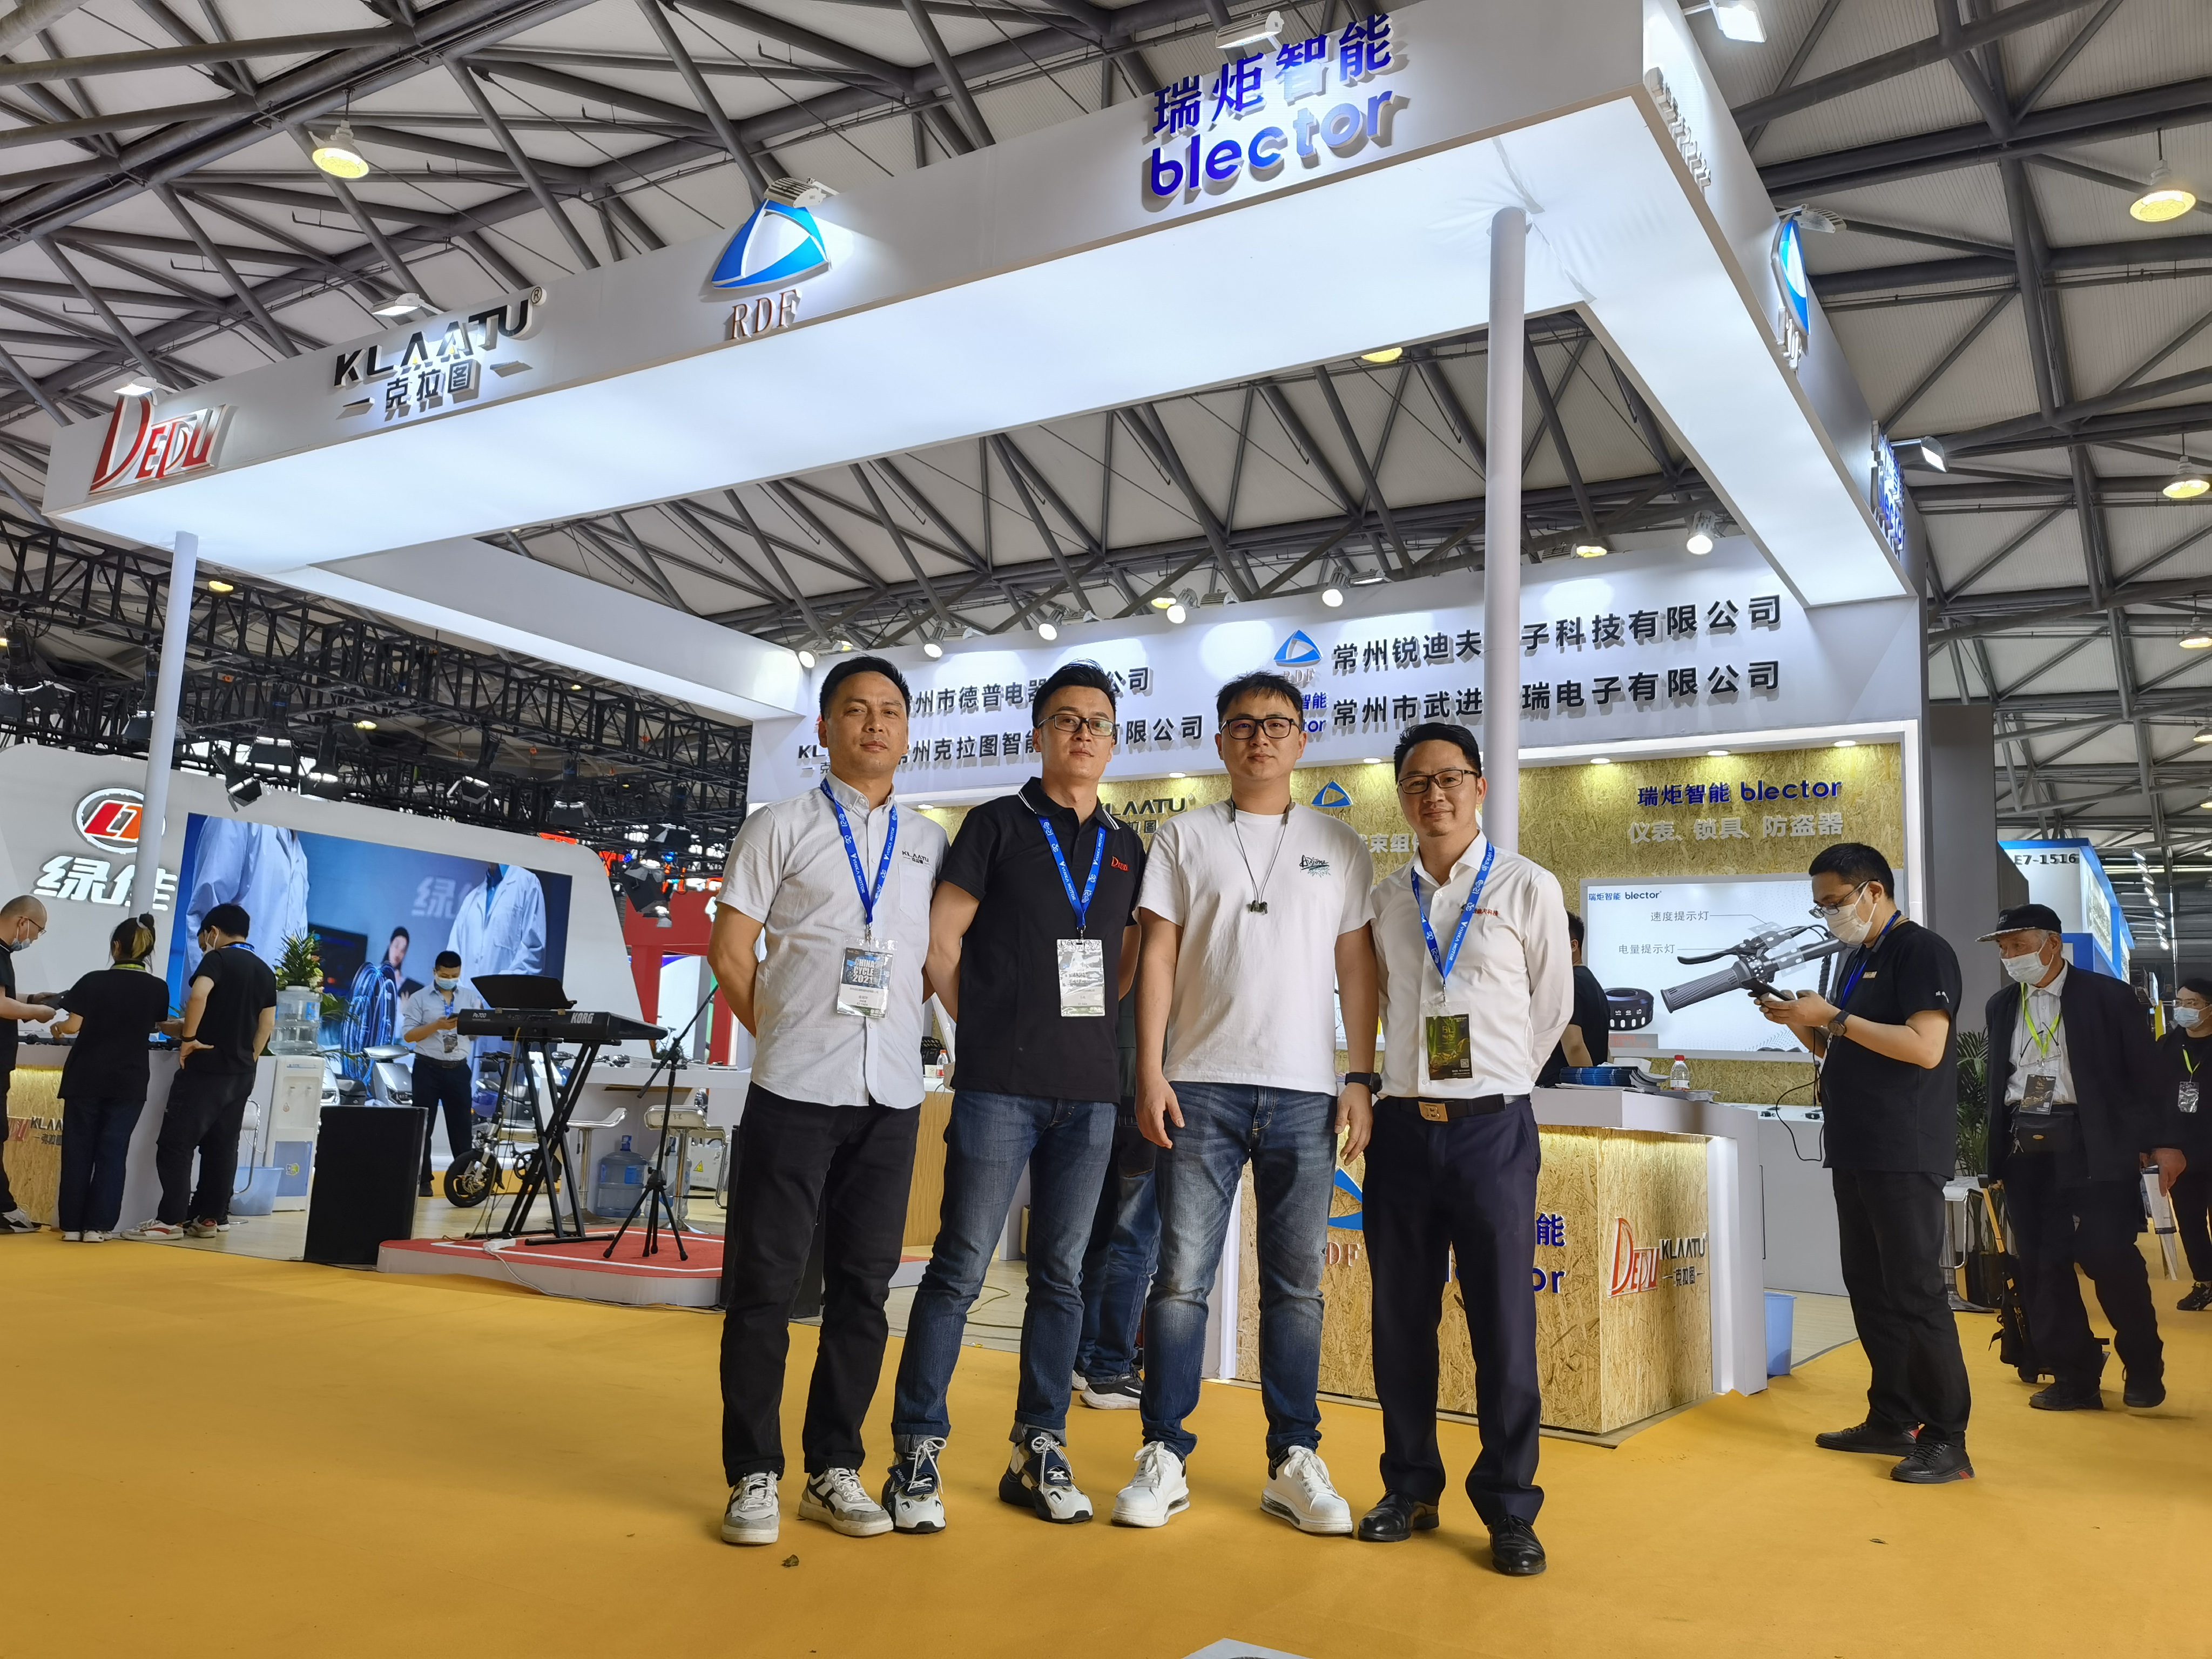 Welcome to Blector booth in China International Bicycle Exhibition E7-1424